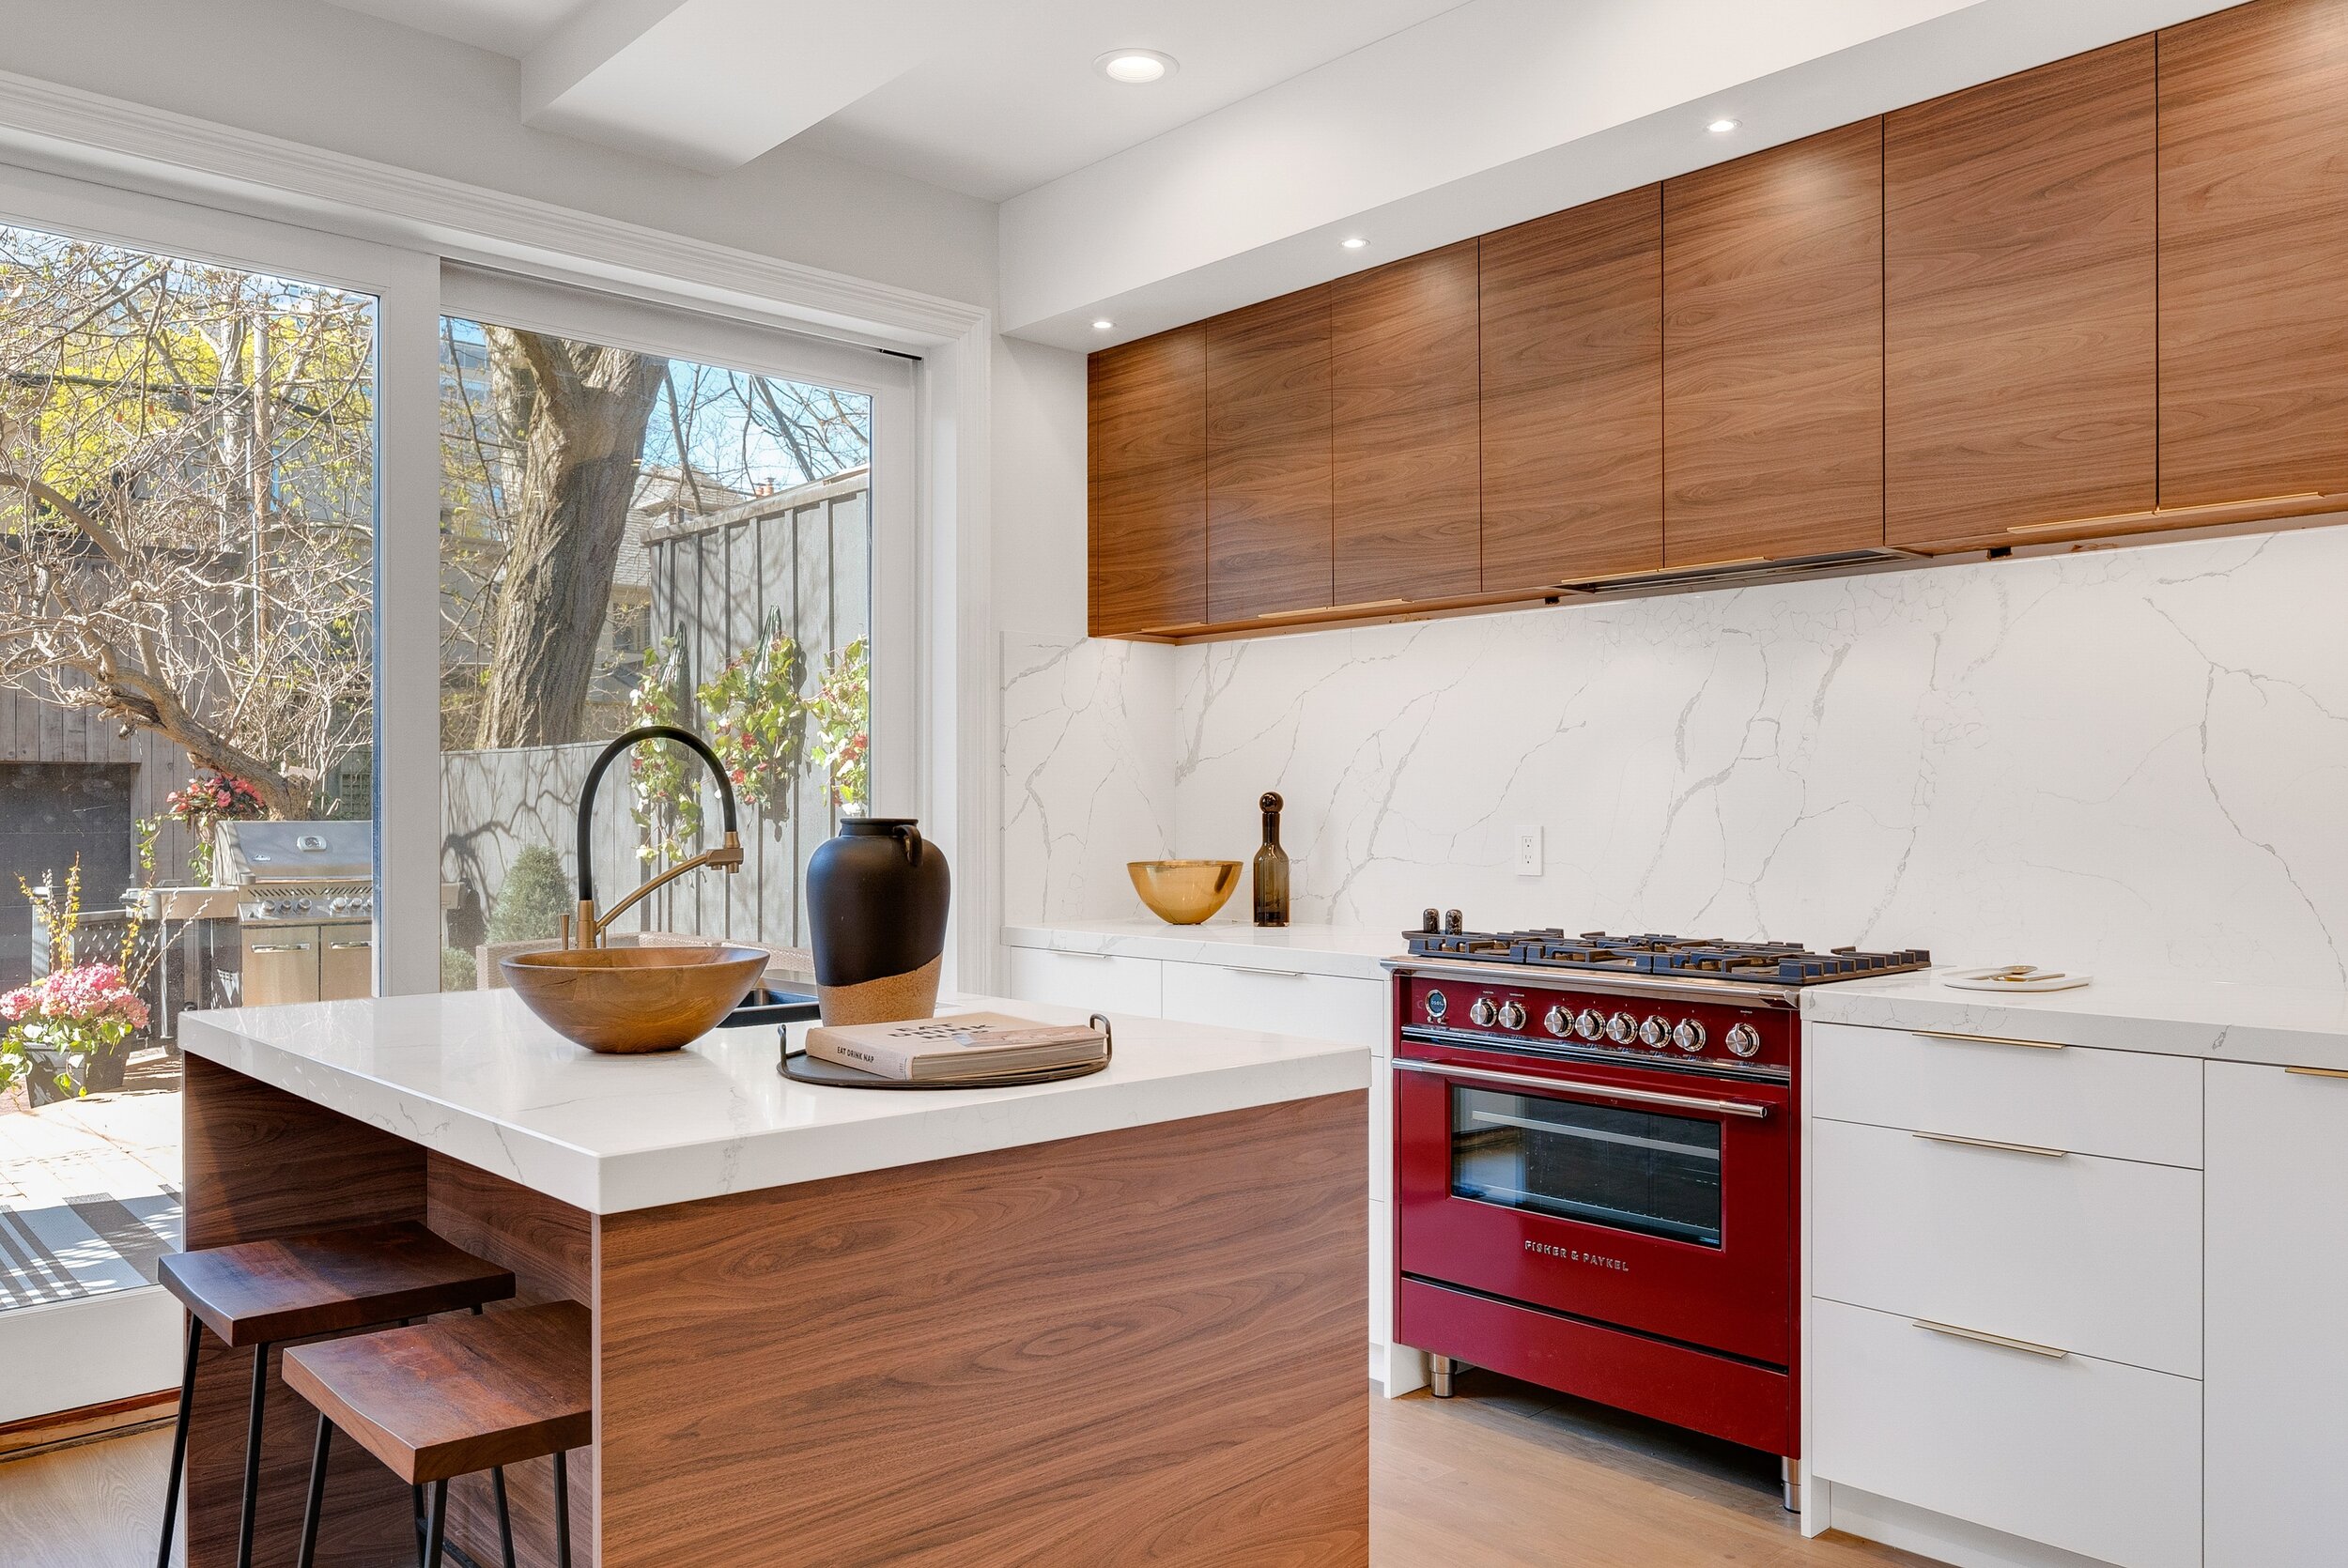 modern kitchens require a major renovation